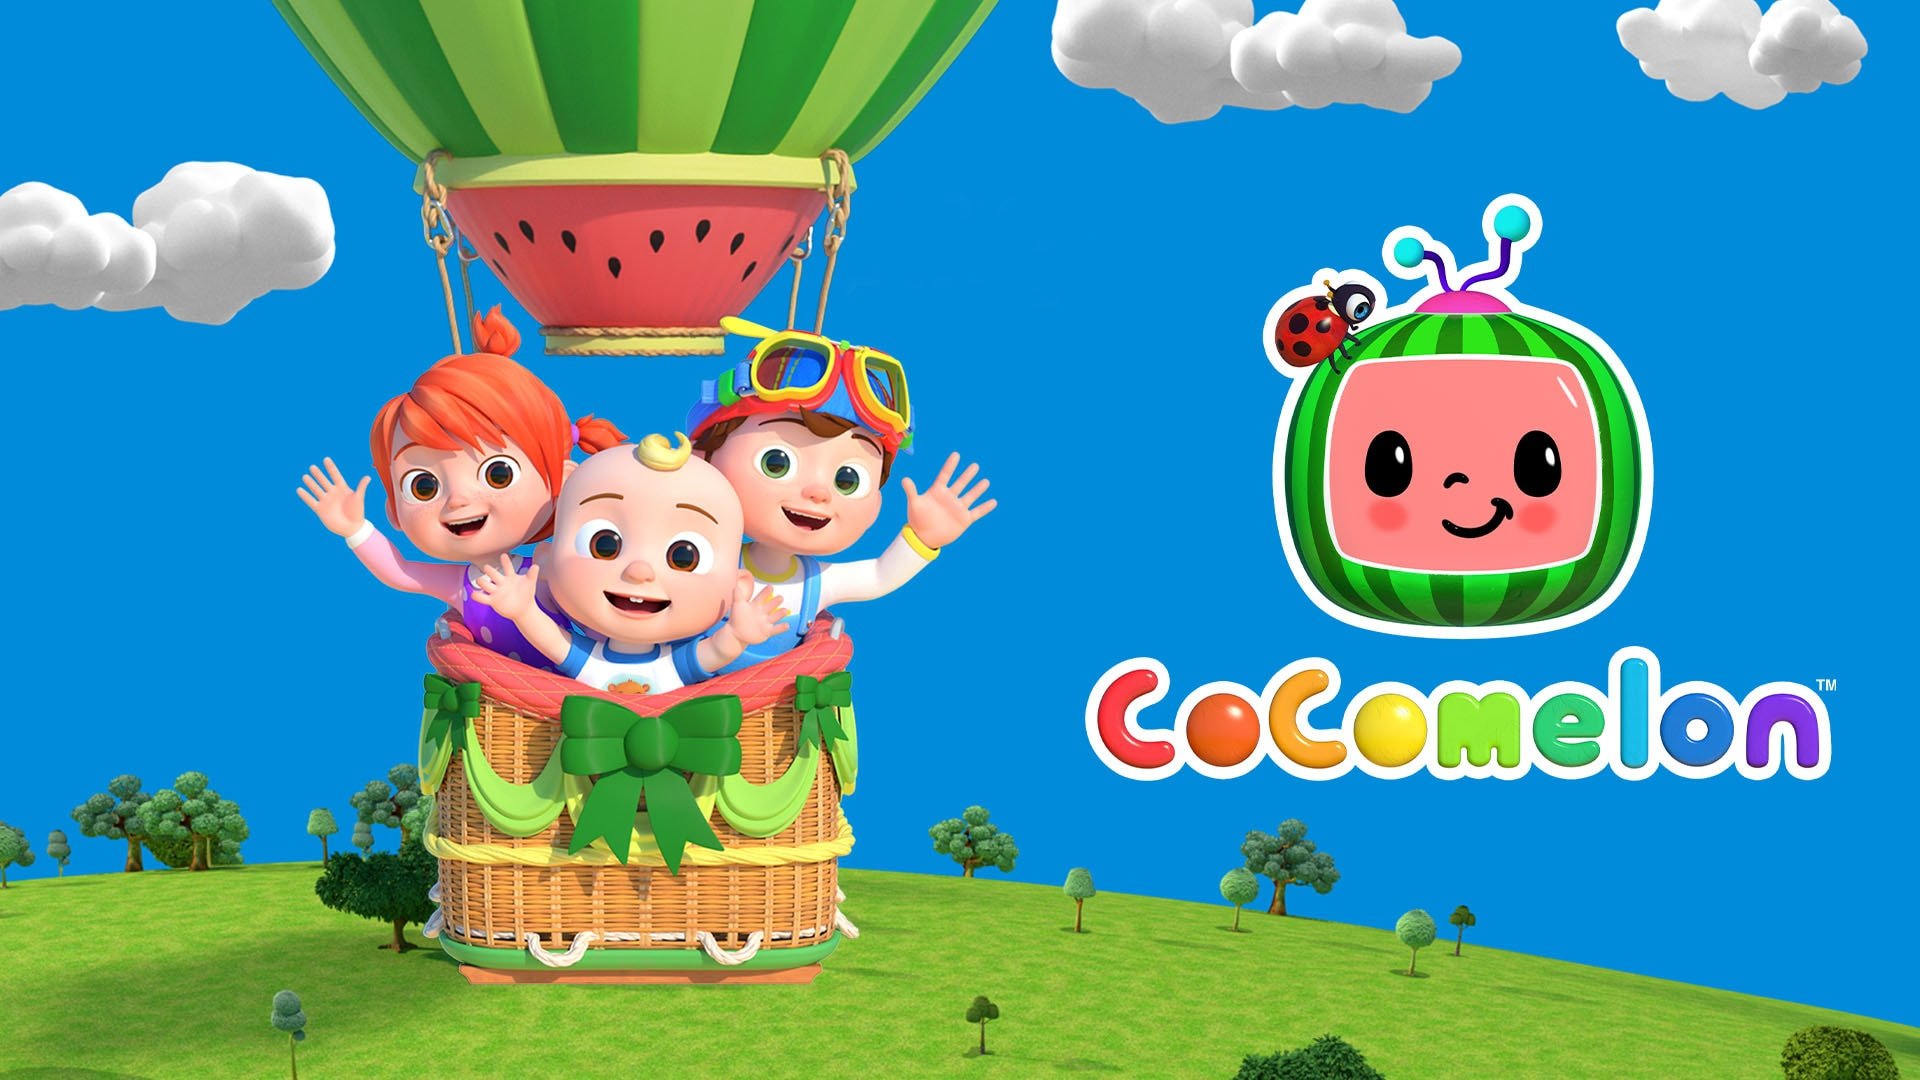 Watch Cocomelon Online - Stream Full Episodes